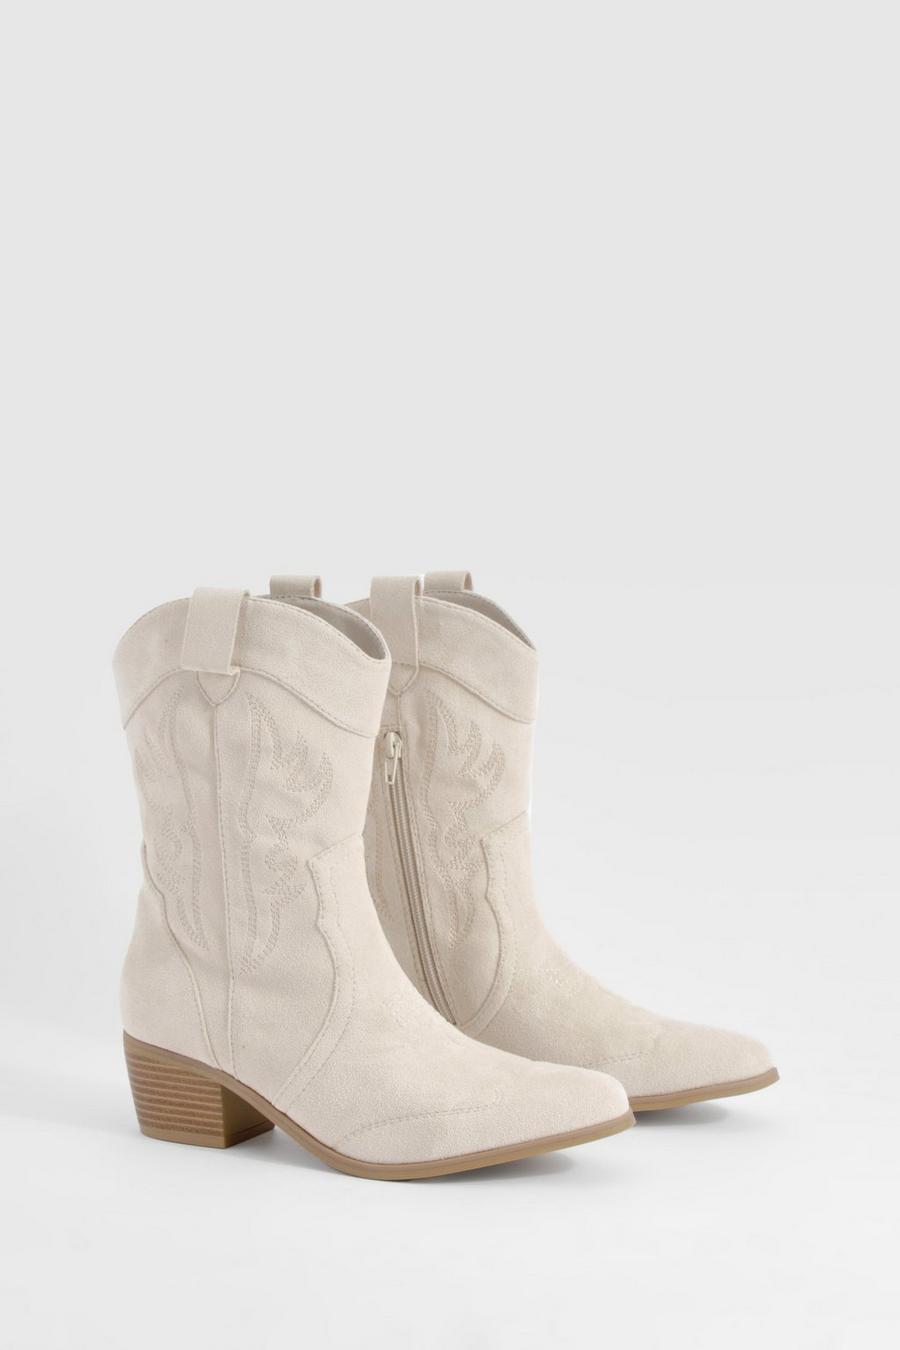 Light beige Embroidered Western Ankle Cowboy Boots